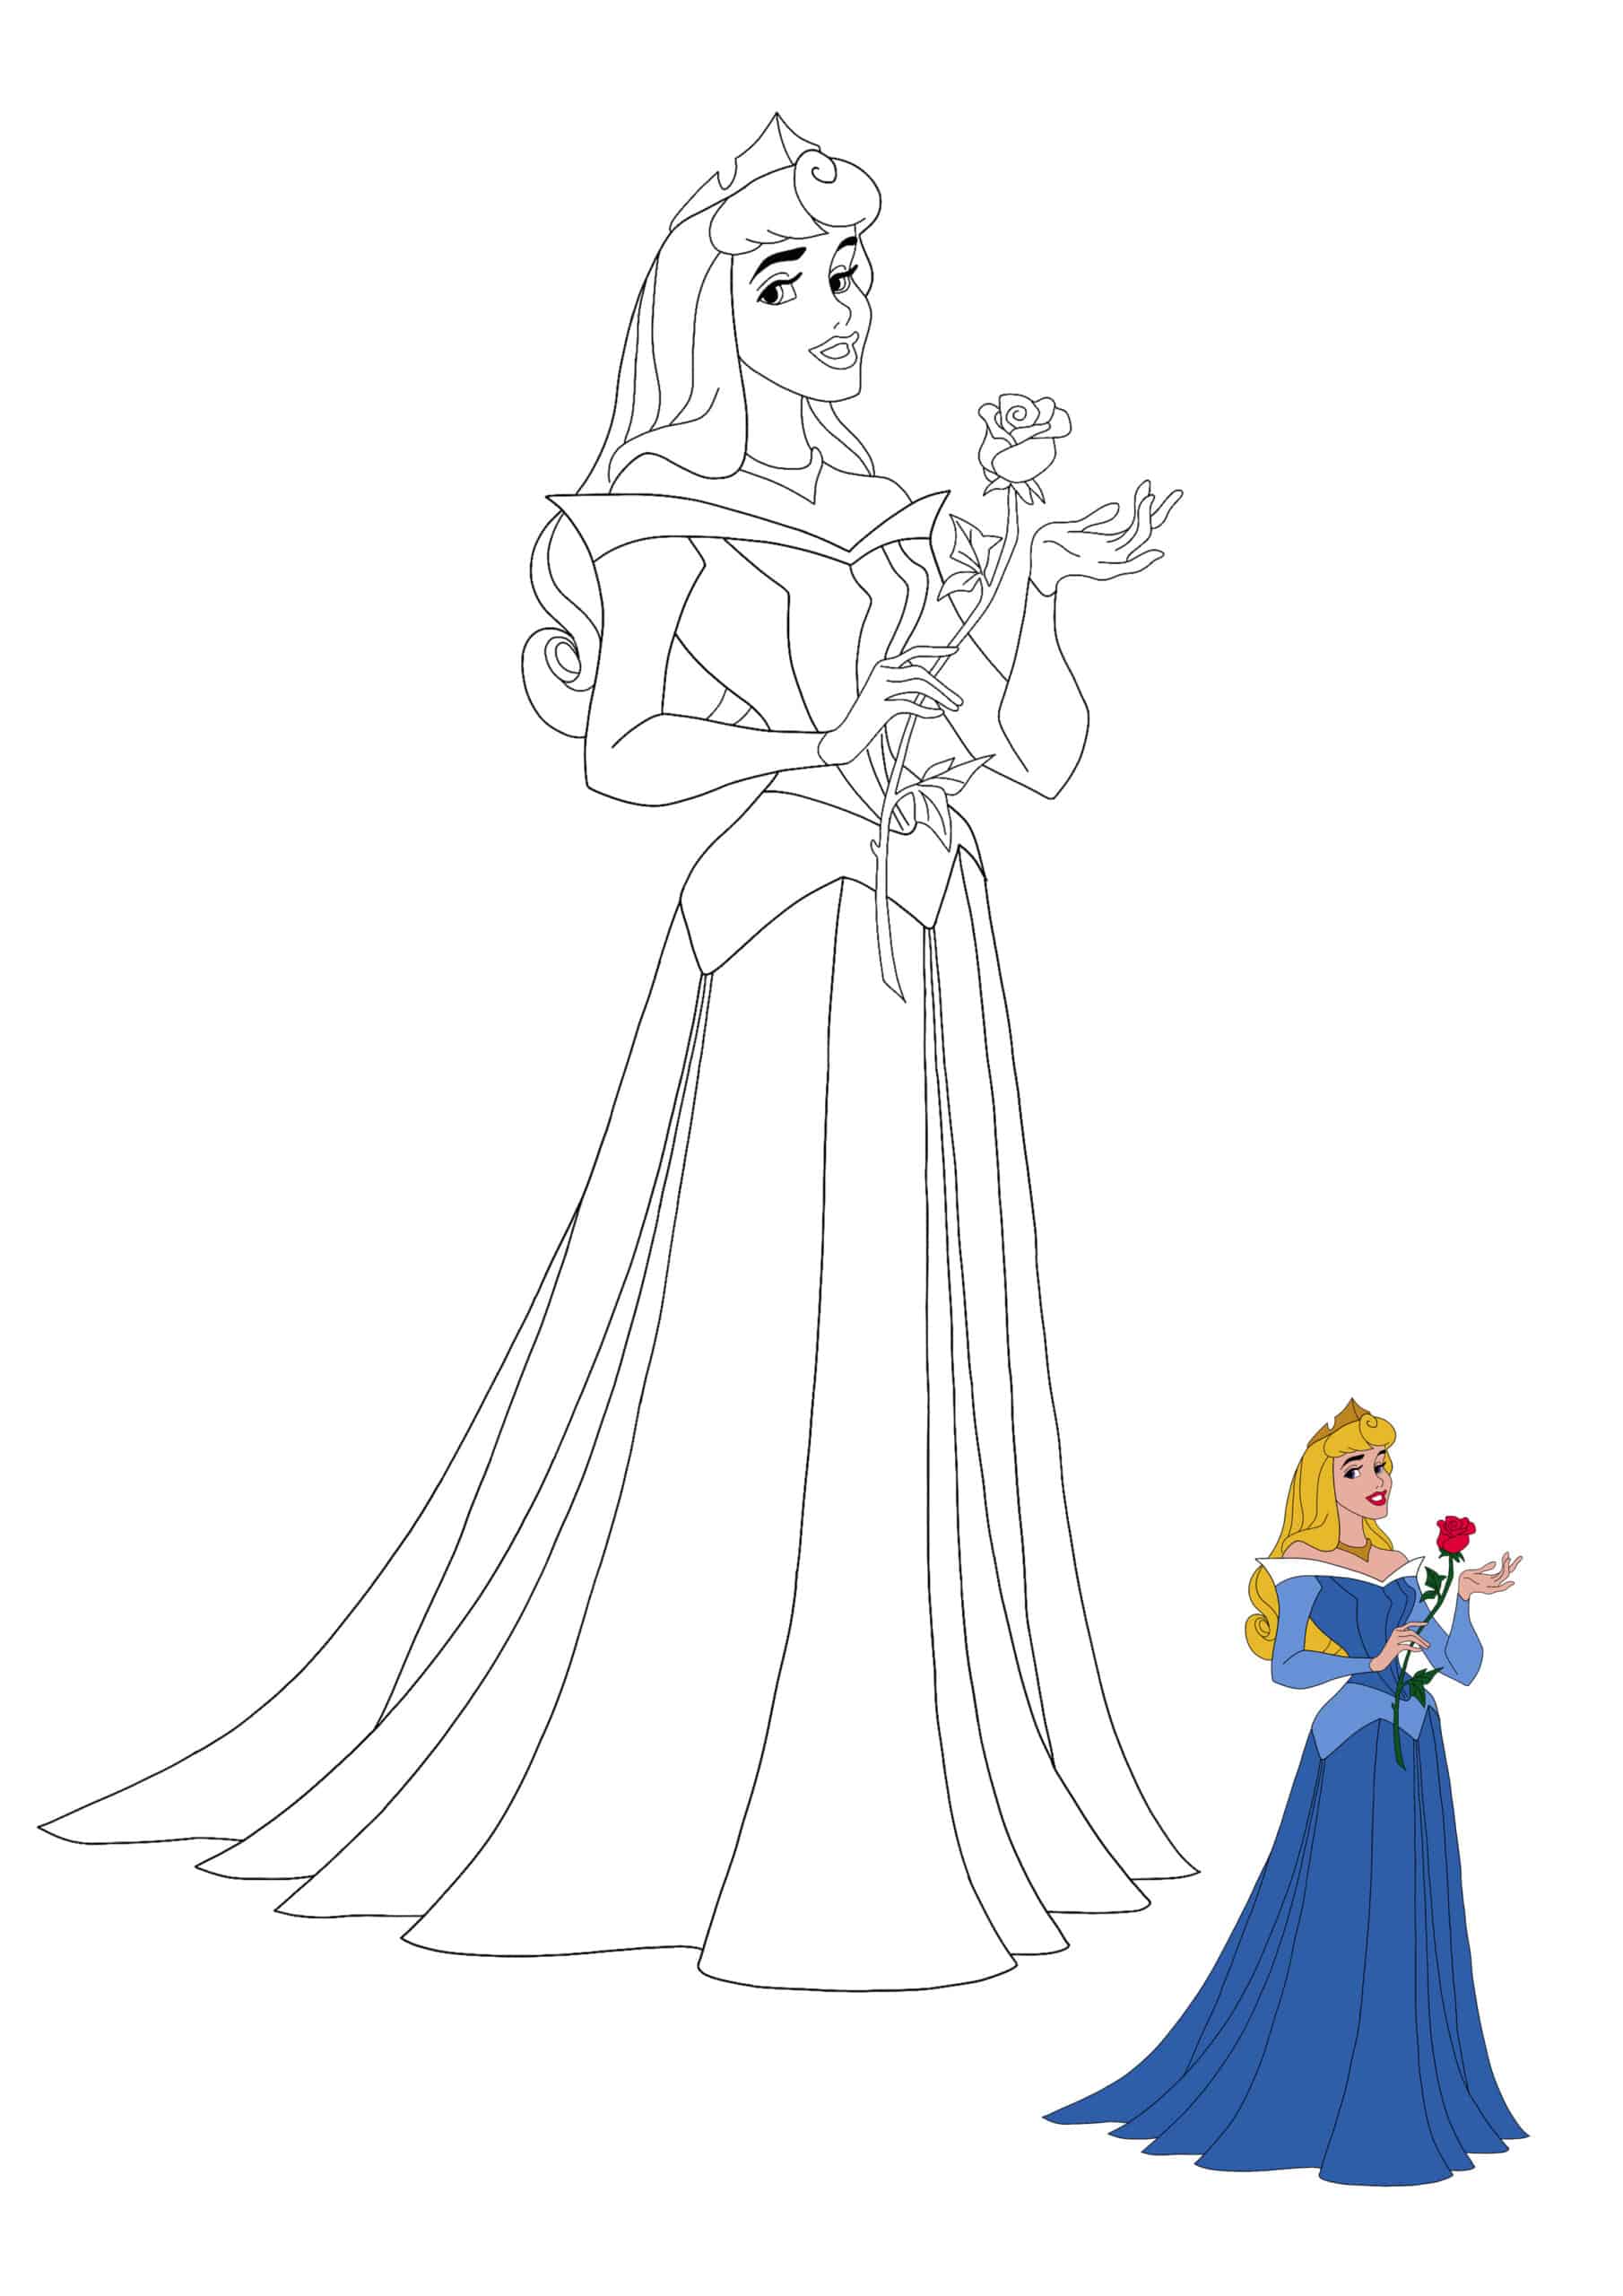 Princess Aurora From Sleeping Beauty Coloring Page